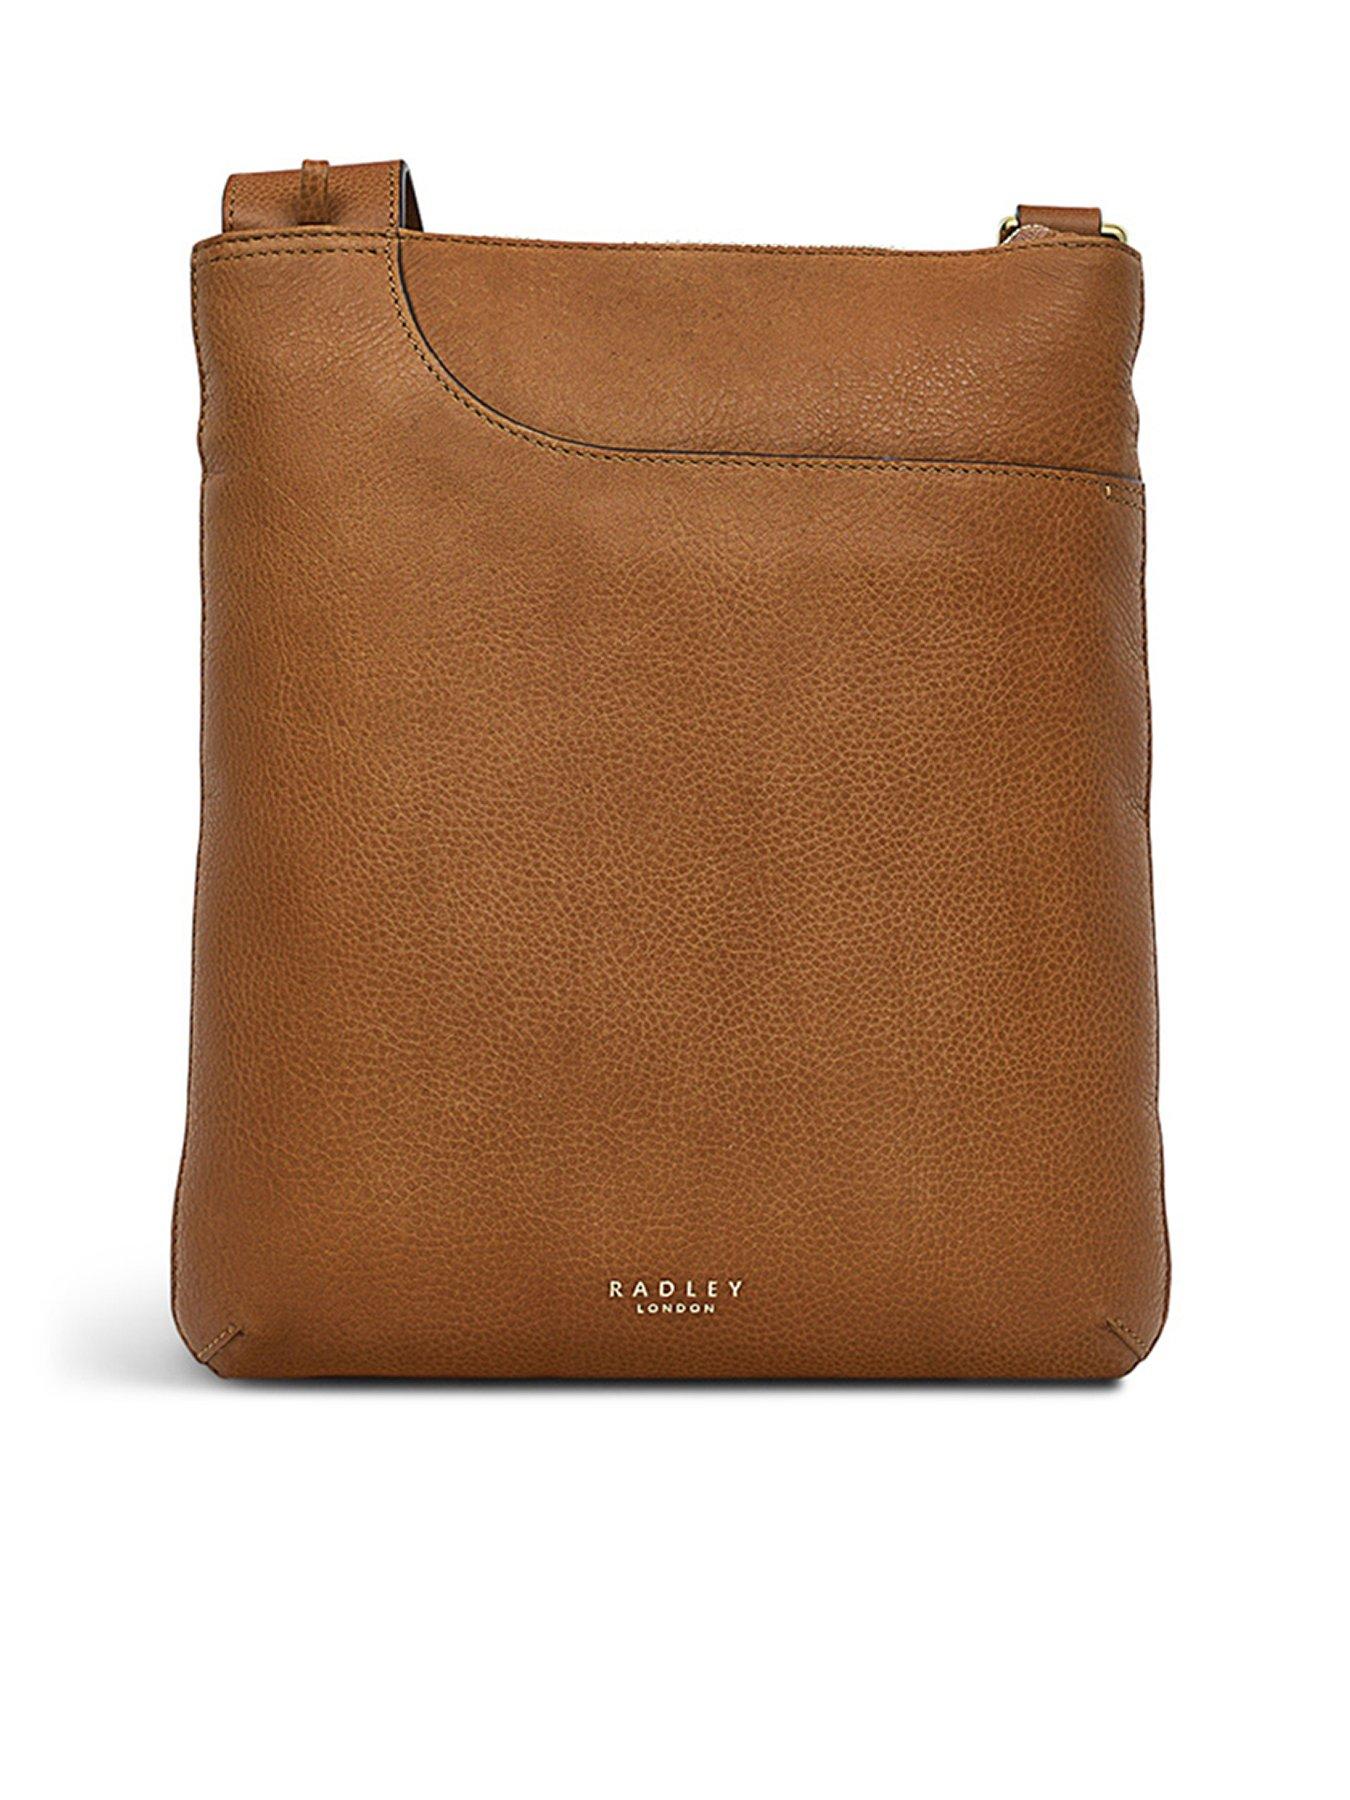 Radley London Fortune Street Small Leather Bifold Purse in Natural : Amazon.co.uk:  Fashion